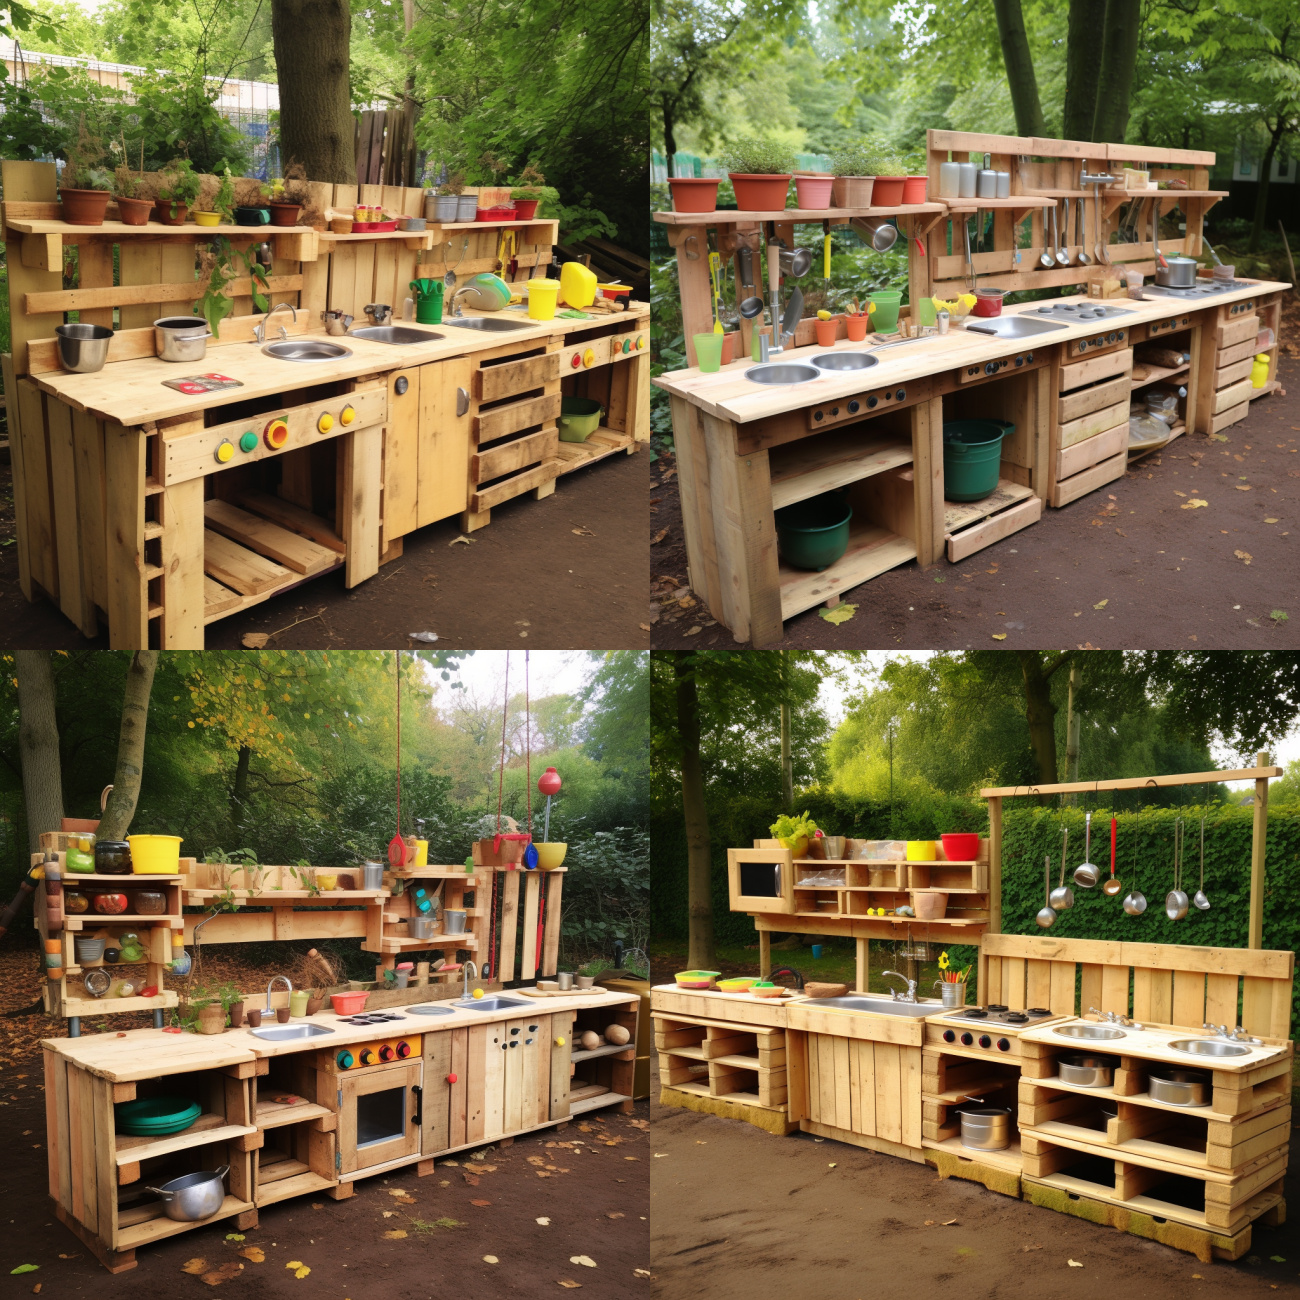 School mud kitchen, great for Schools and Nurseries, great for kids to play with and learn.